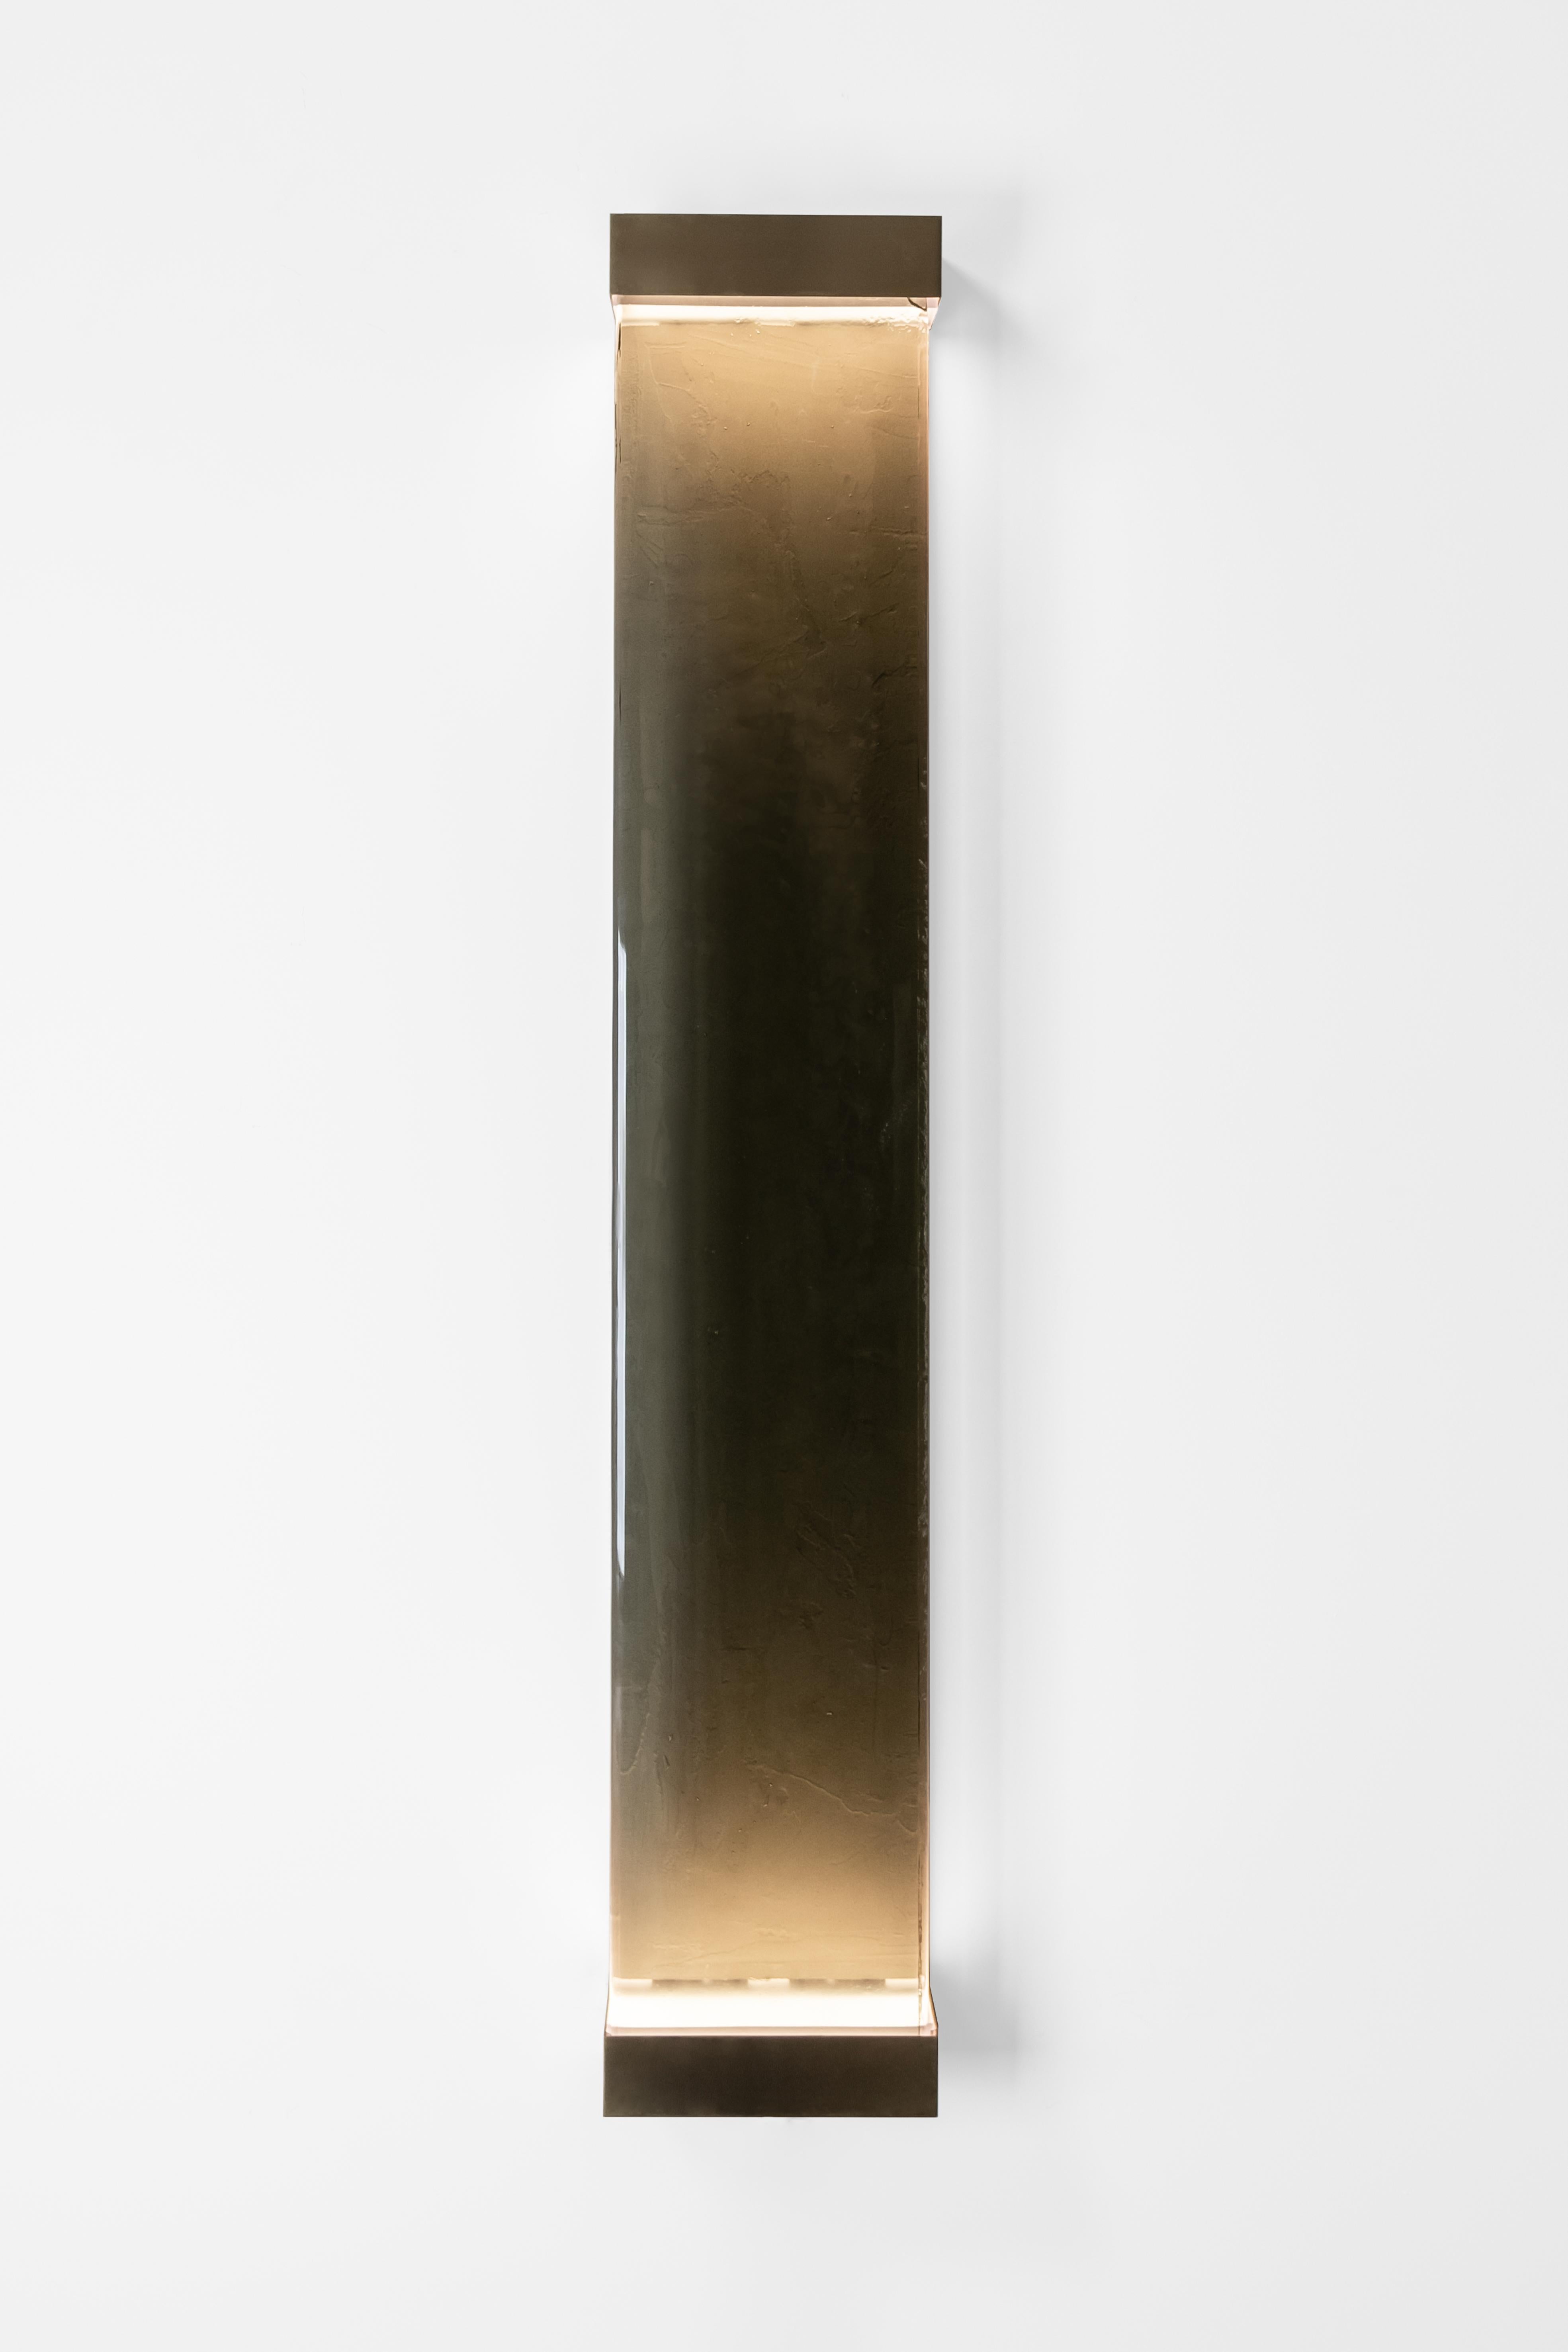 Jud wall lamp by Draga & Aurel
Dimensions: W 23, D 10, H 131
Materials: Resin and brass

All our lamps can be wired according to each country. If sold to the USA it will be wired for the USA for instance.

Inspired by minimalism, the Jud lamps are